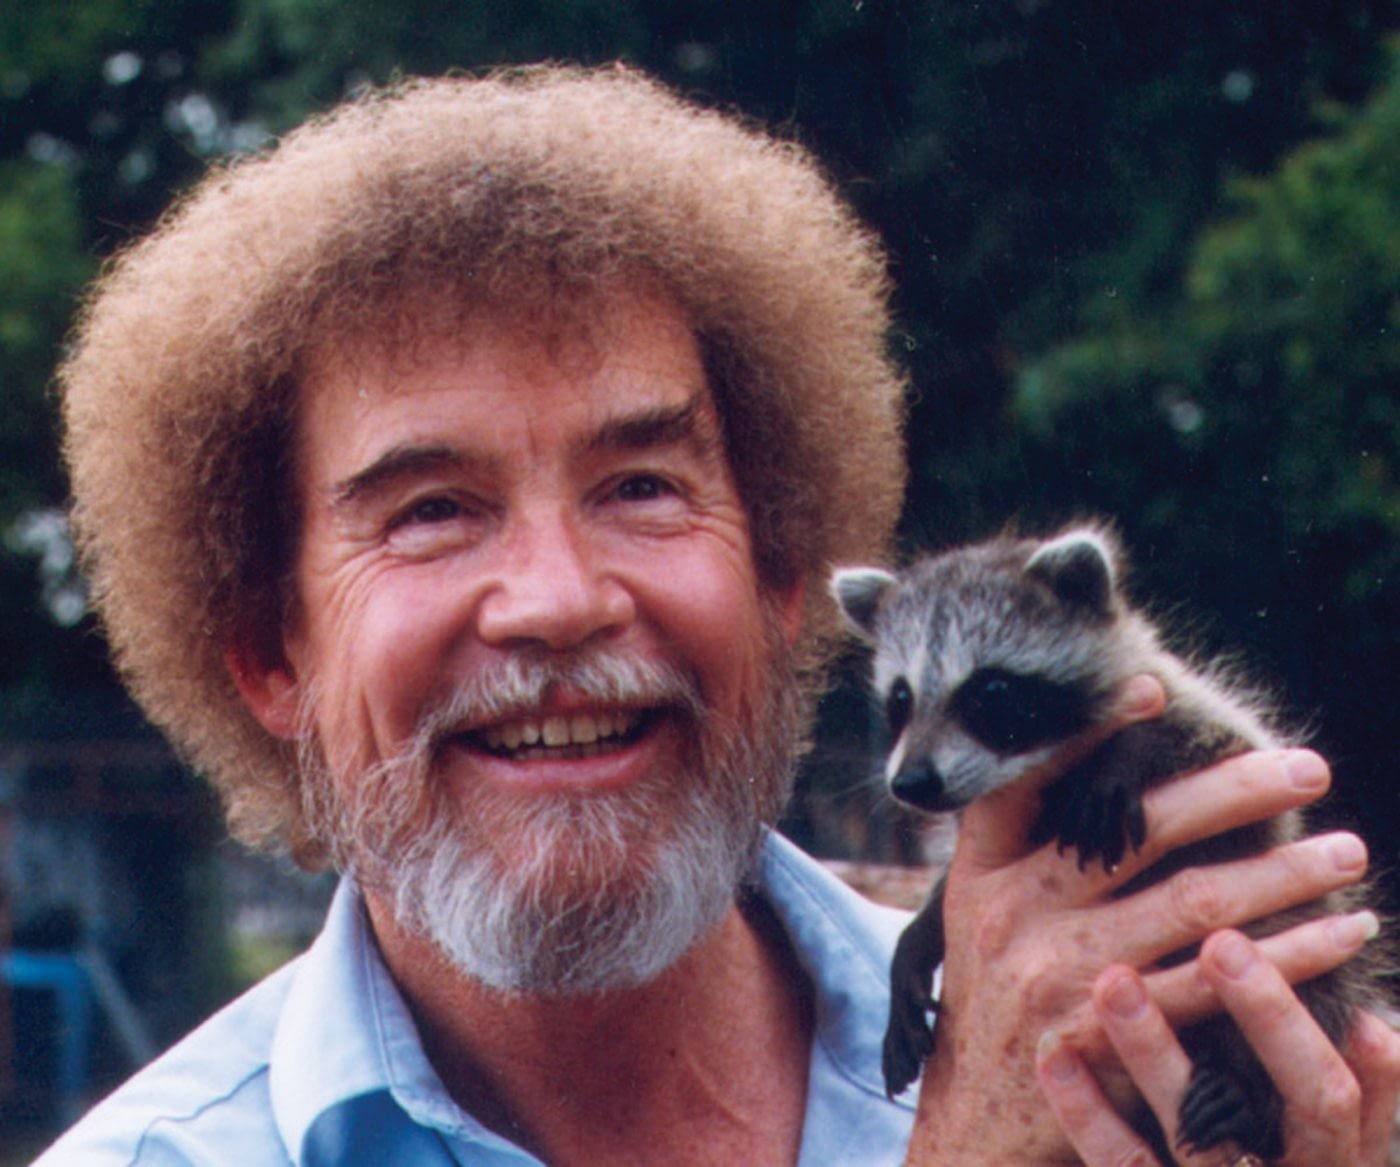 Image: Bob Ross holding a baby racoon